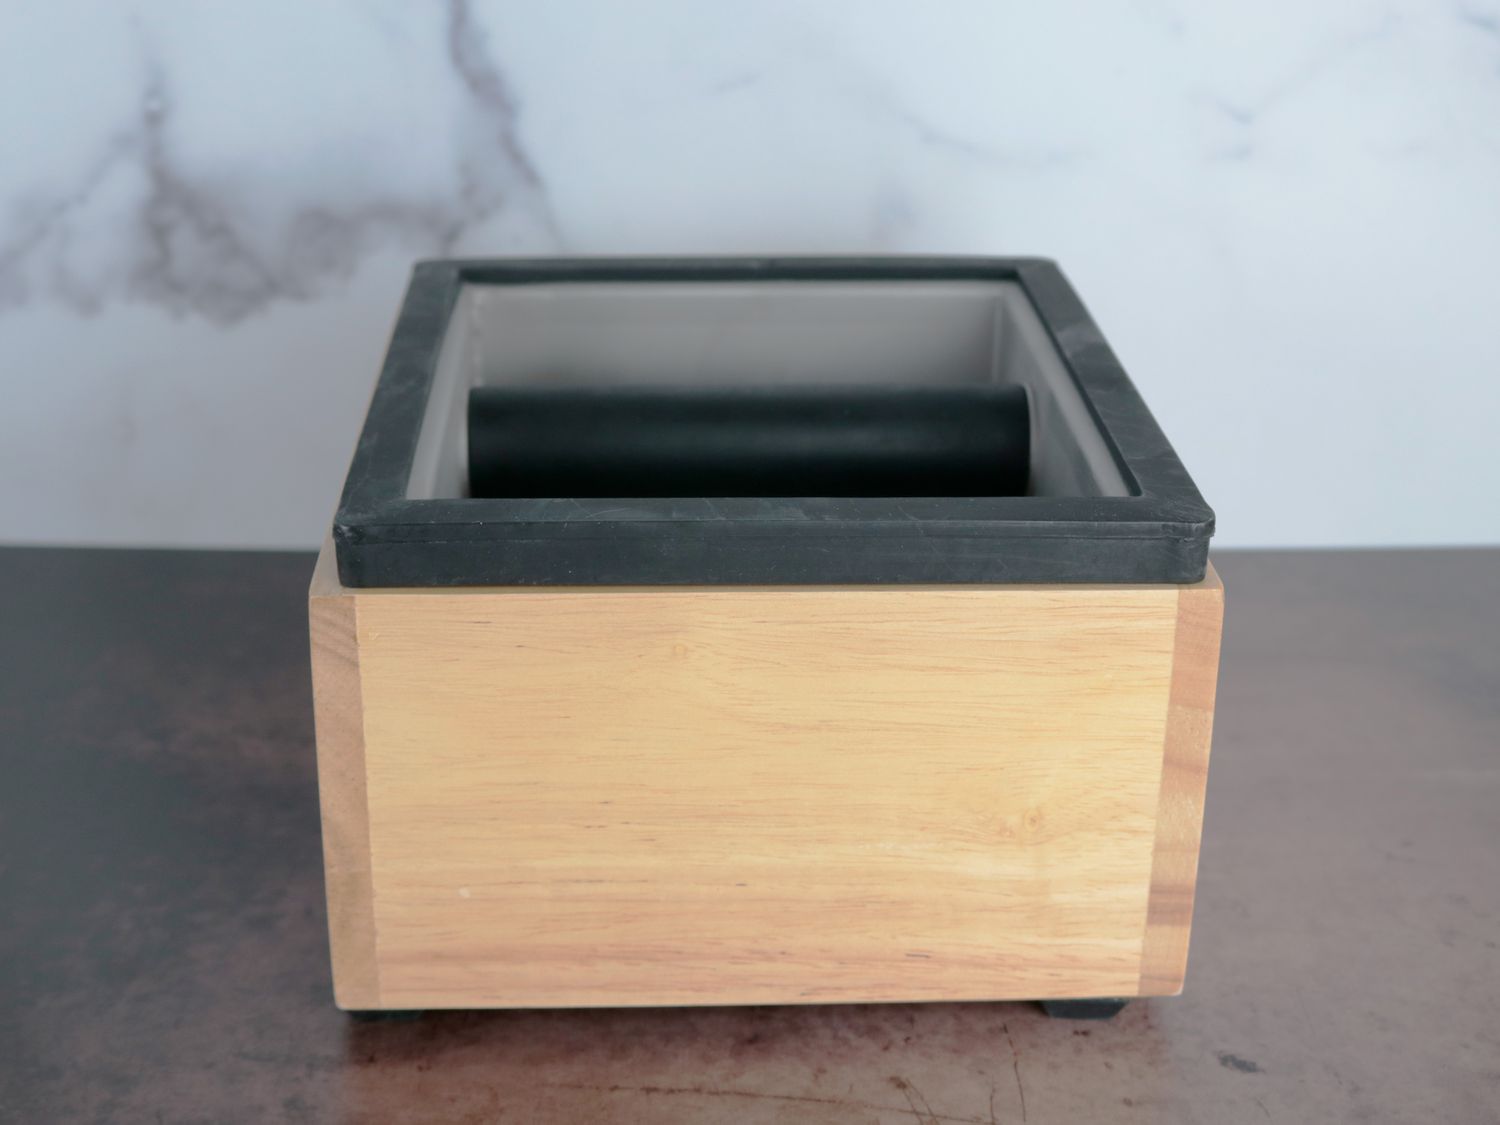 the rattleware knock box on a marble background